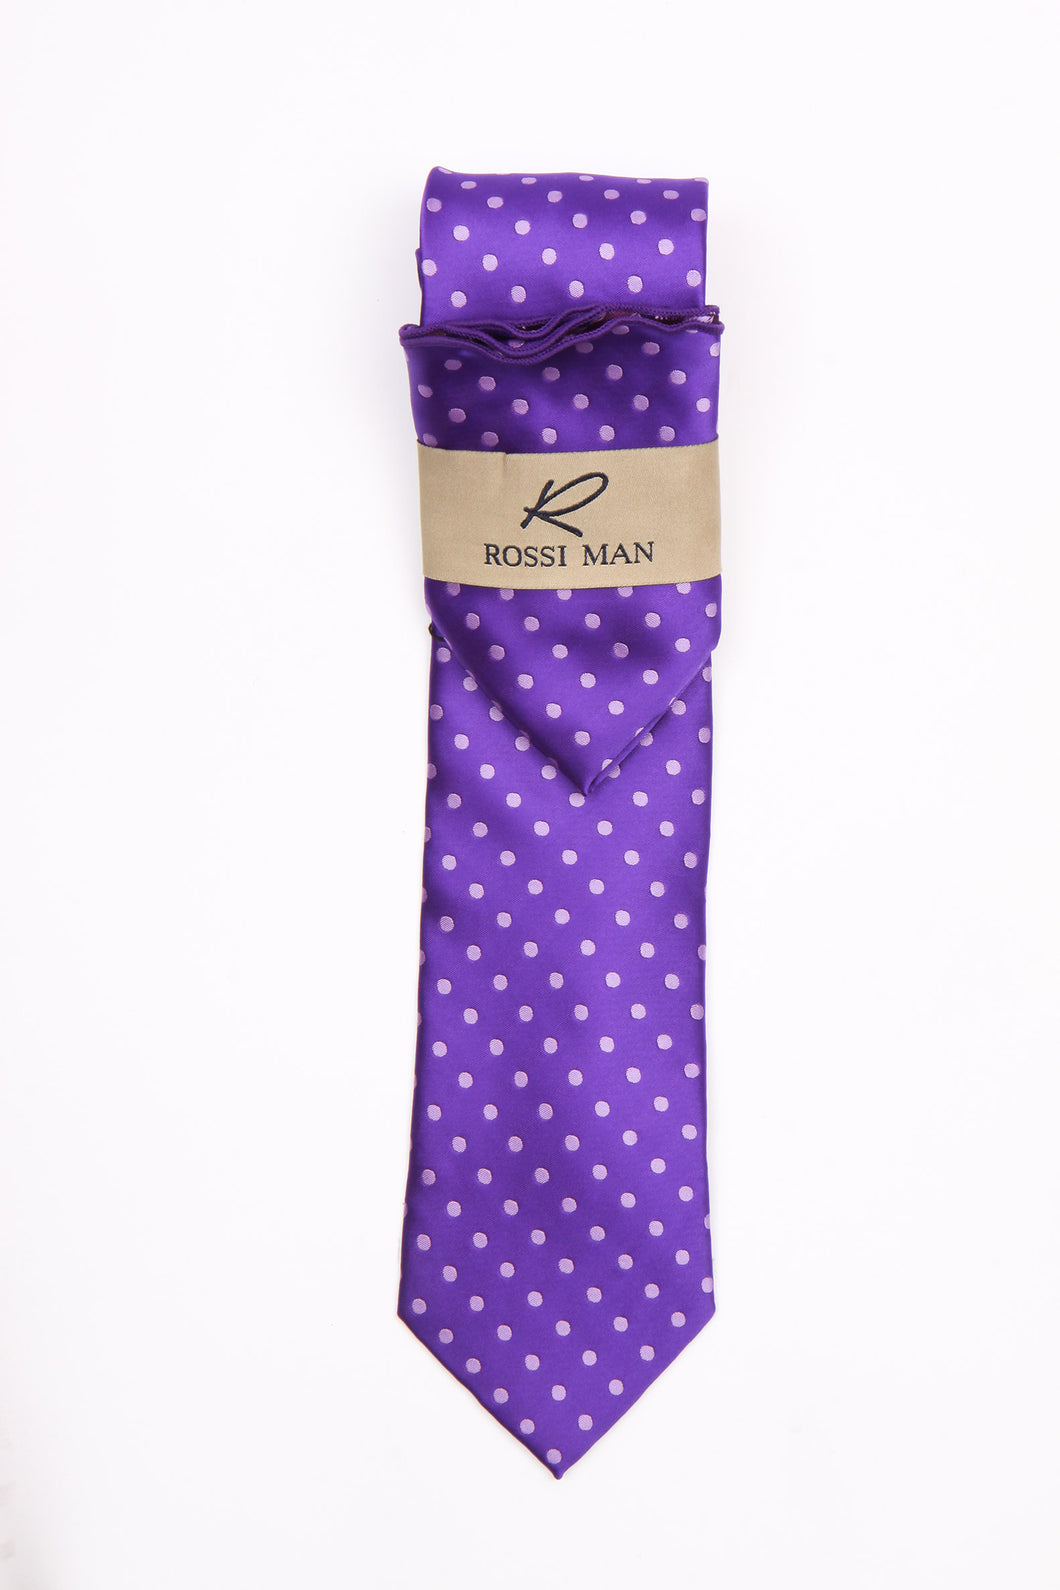 Rossi Man Tie and Pocket Round - RMR662-11